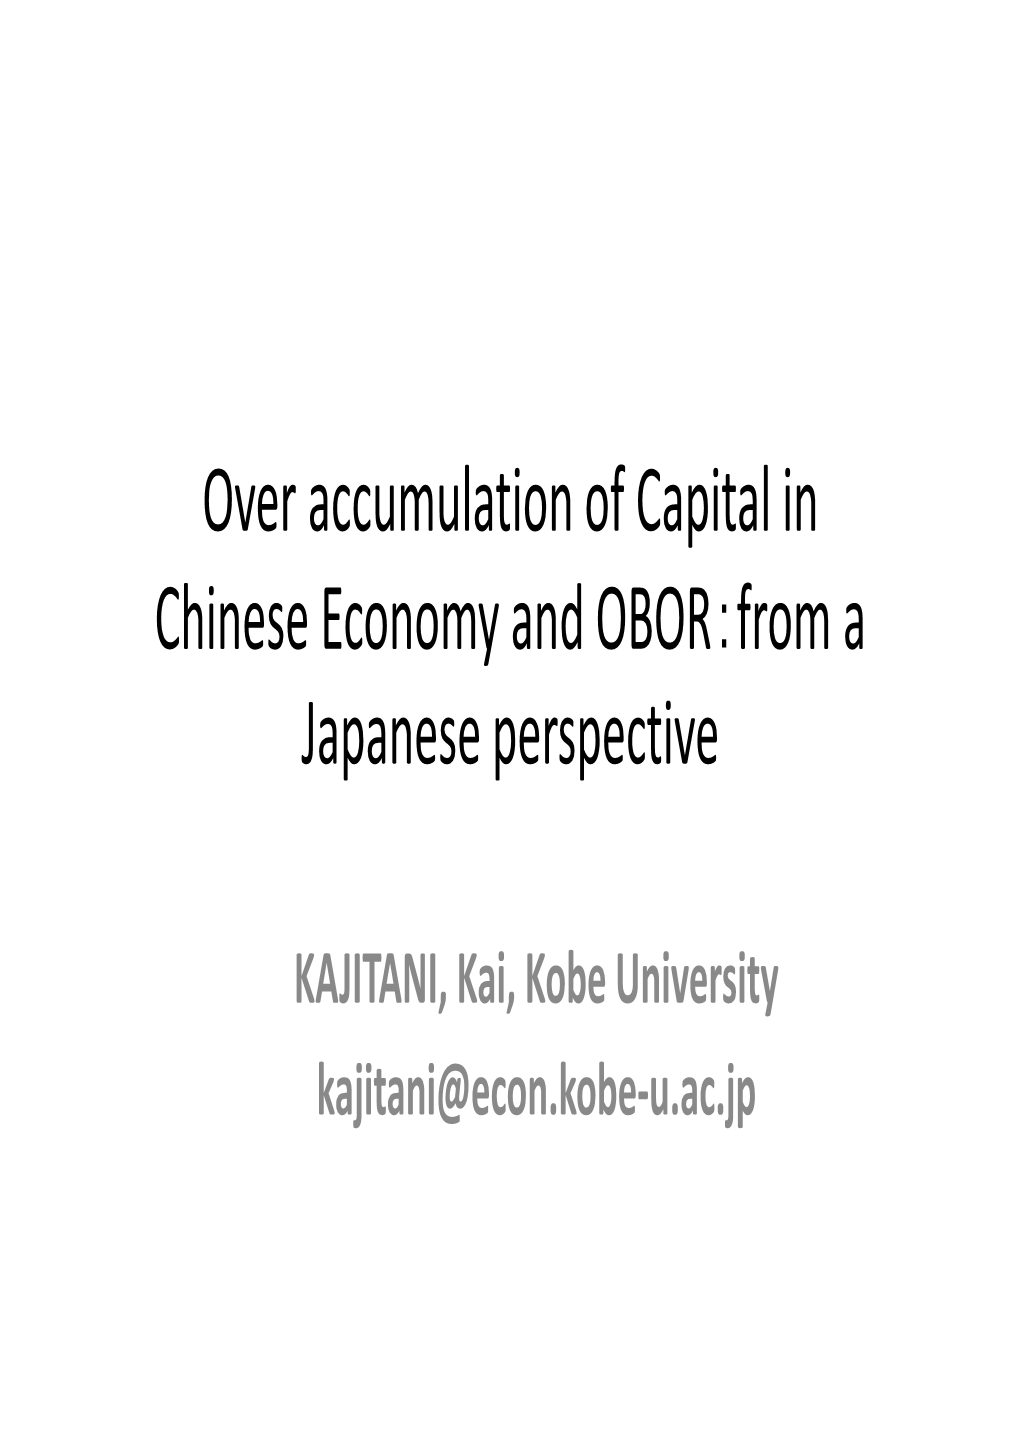 Over Accumulation of Capital in Chinese Economy and OBOR：From a Japanese Perspective